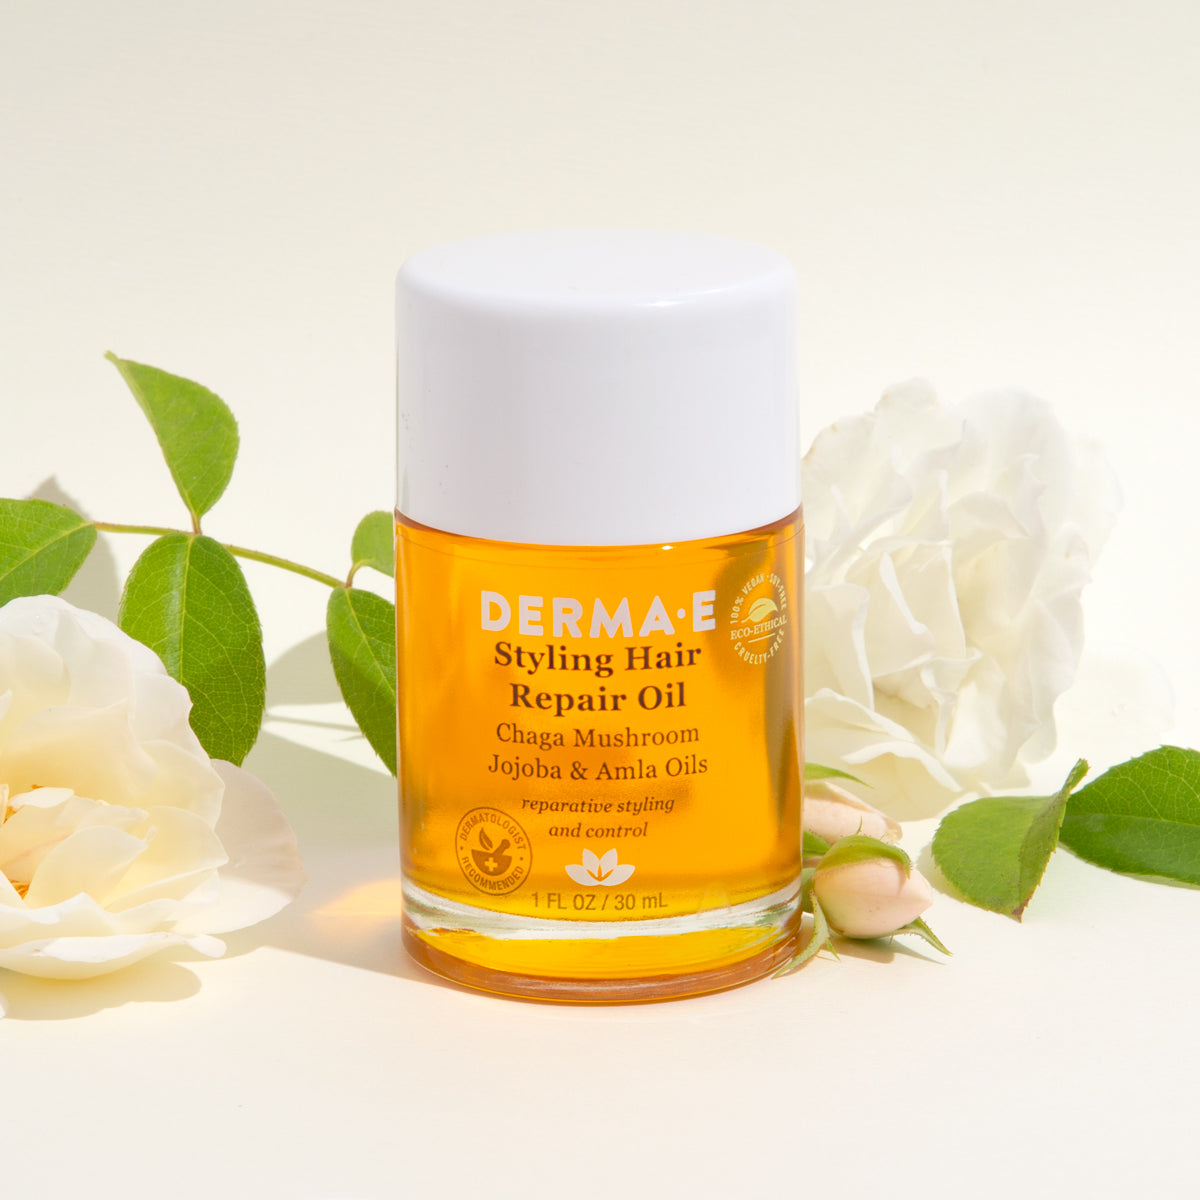 Styling Repair Hair Oil - by DERMA E |ProCare Outlet|